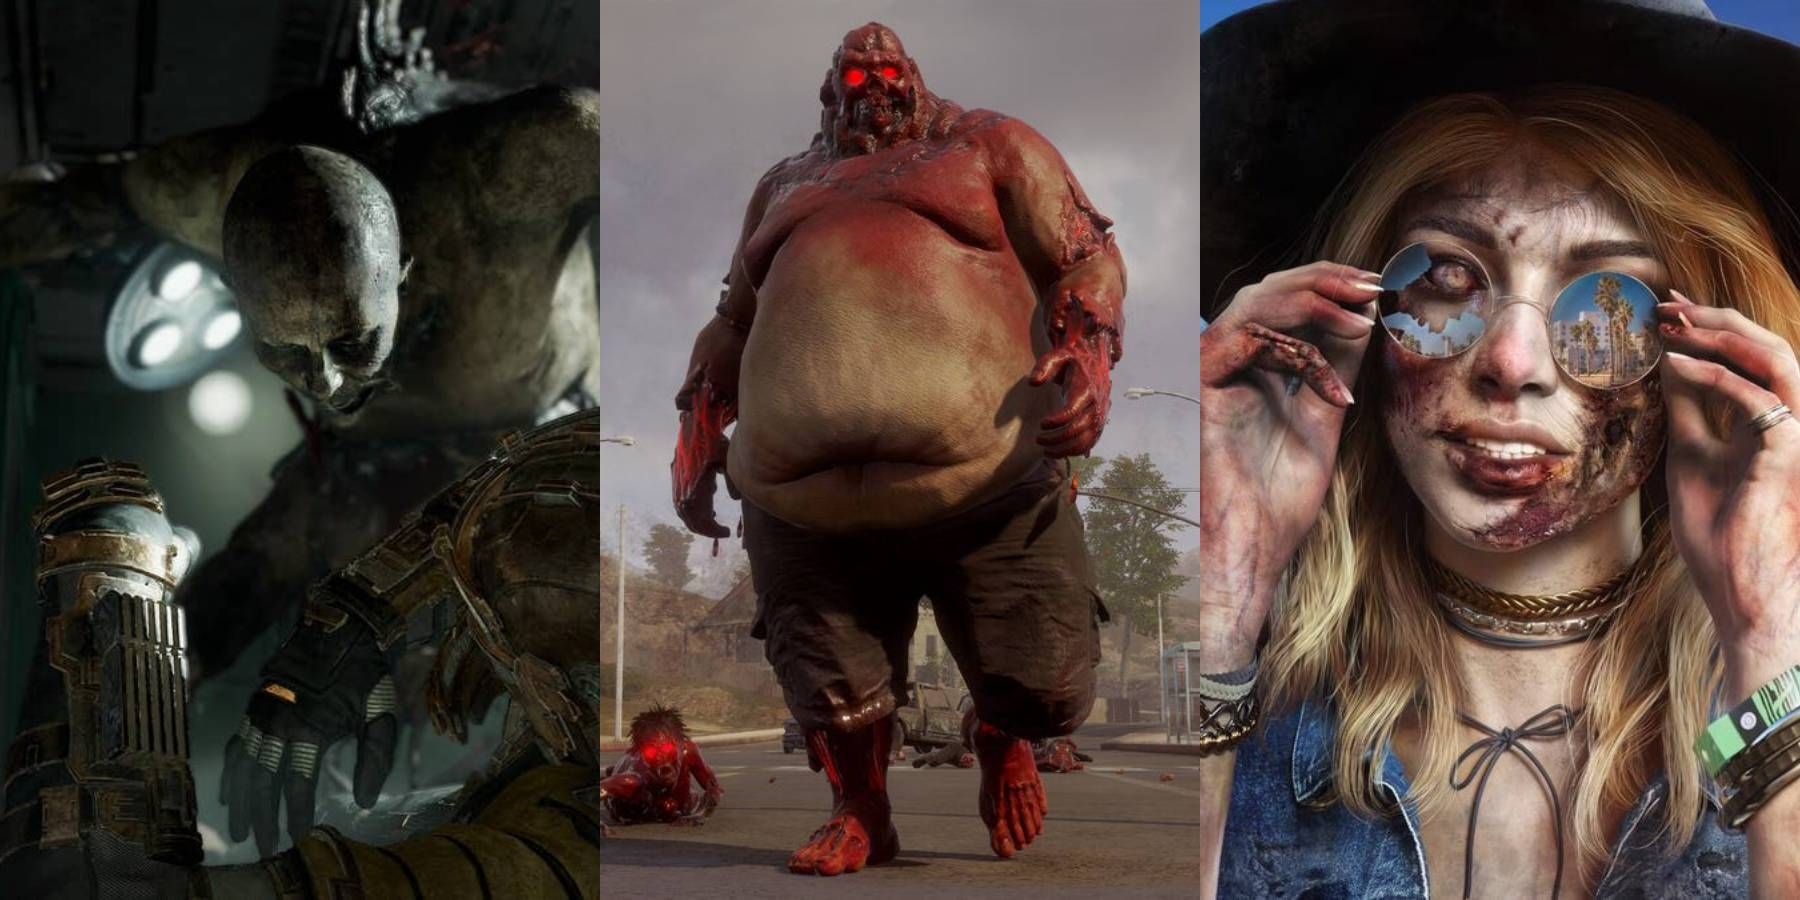 A Necromorph from Dead Space, Juggernaut from State of Decay 2, and zombie from Dead Island 2